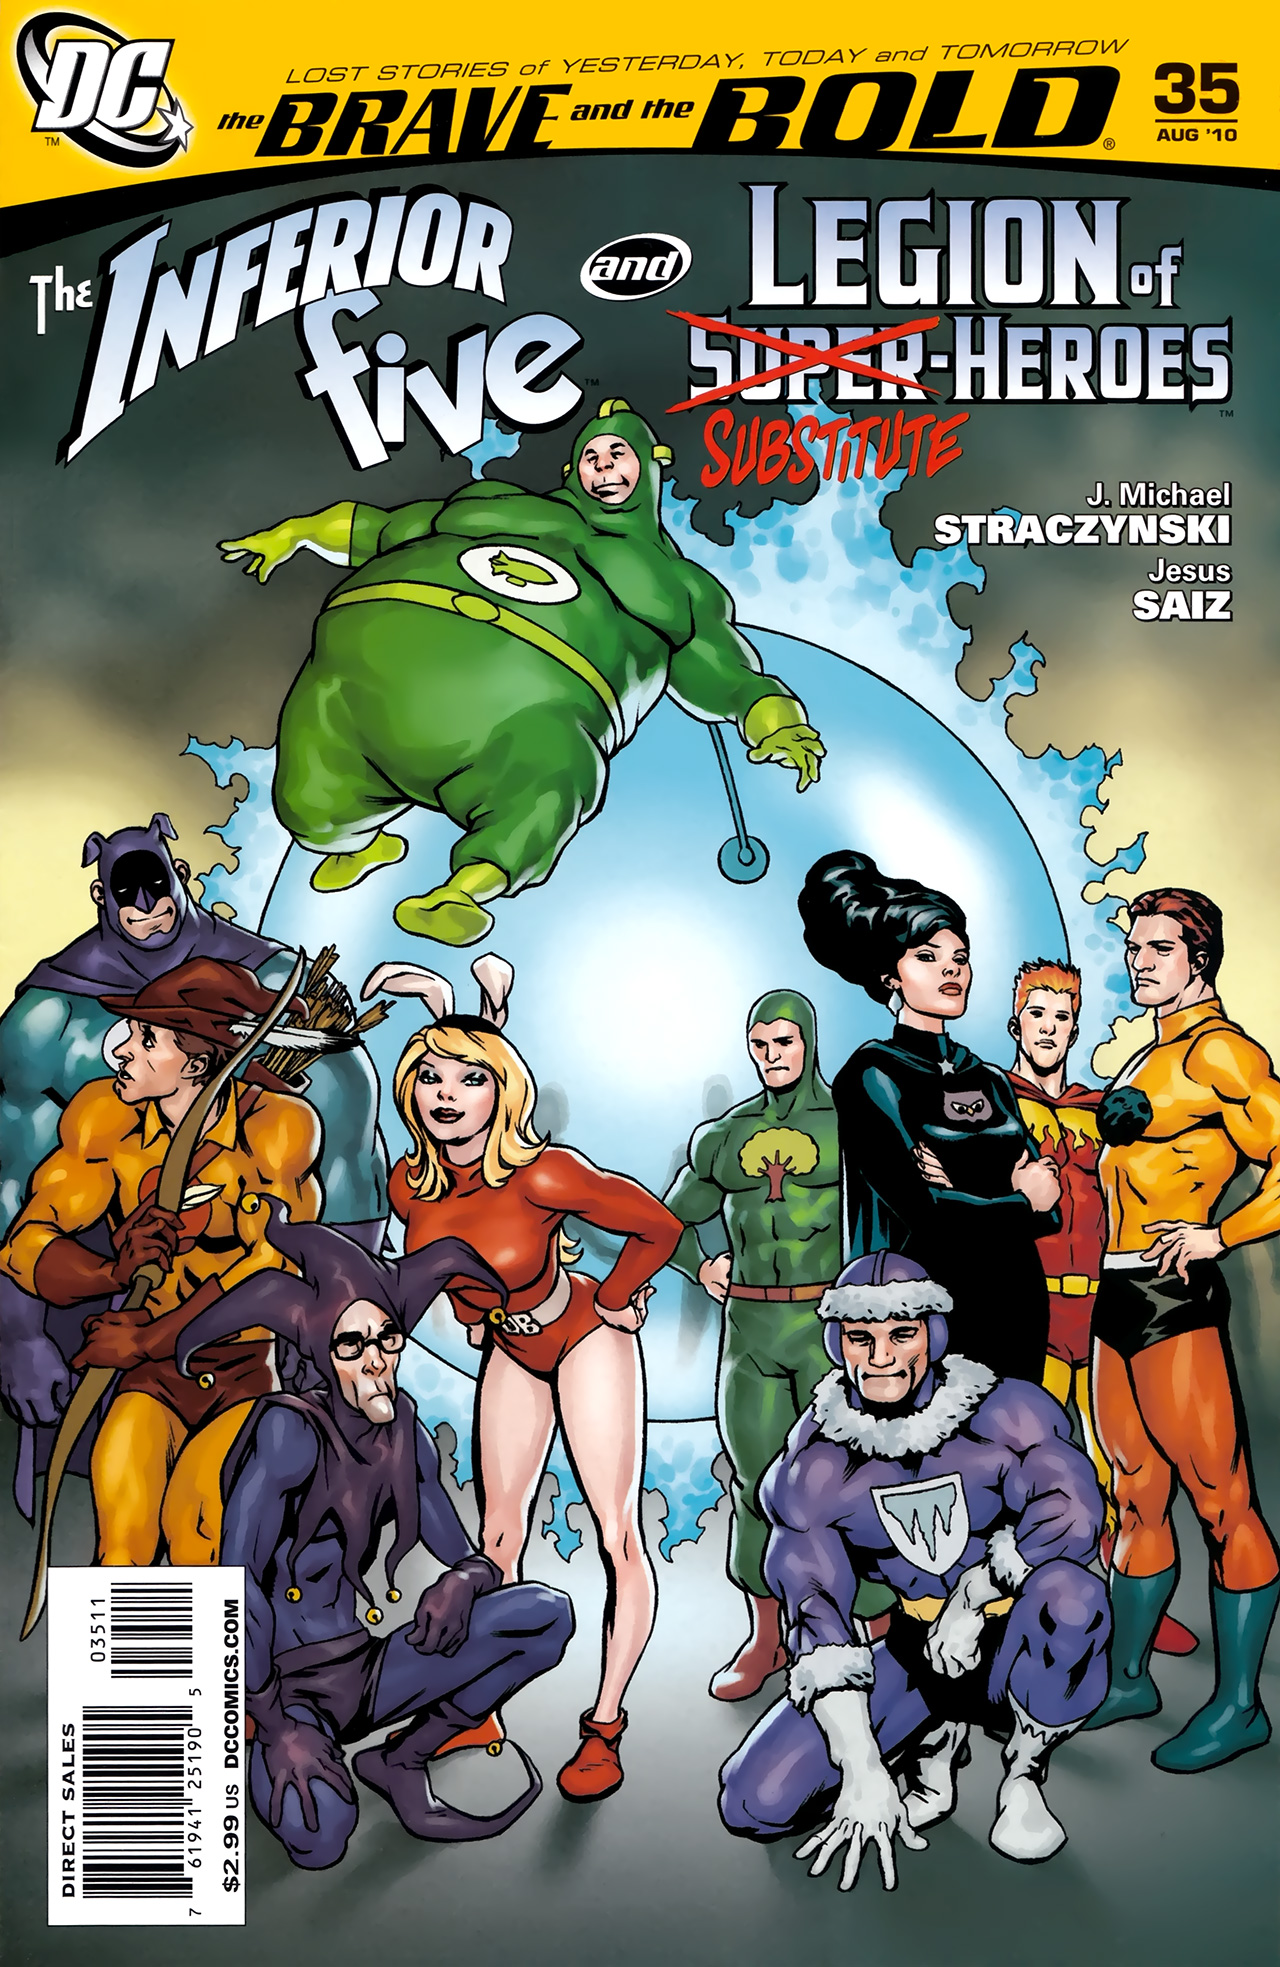 Read online The Brave and the Bold (2007) comic -  Issue #35 - 1